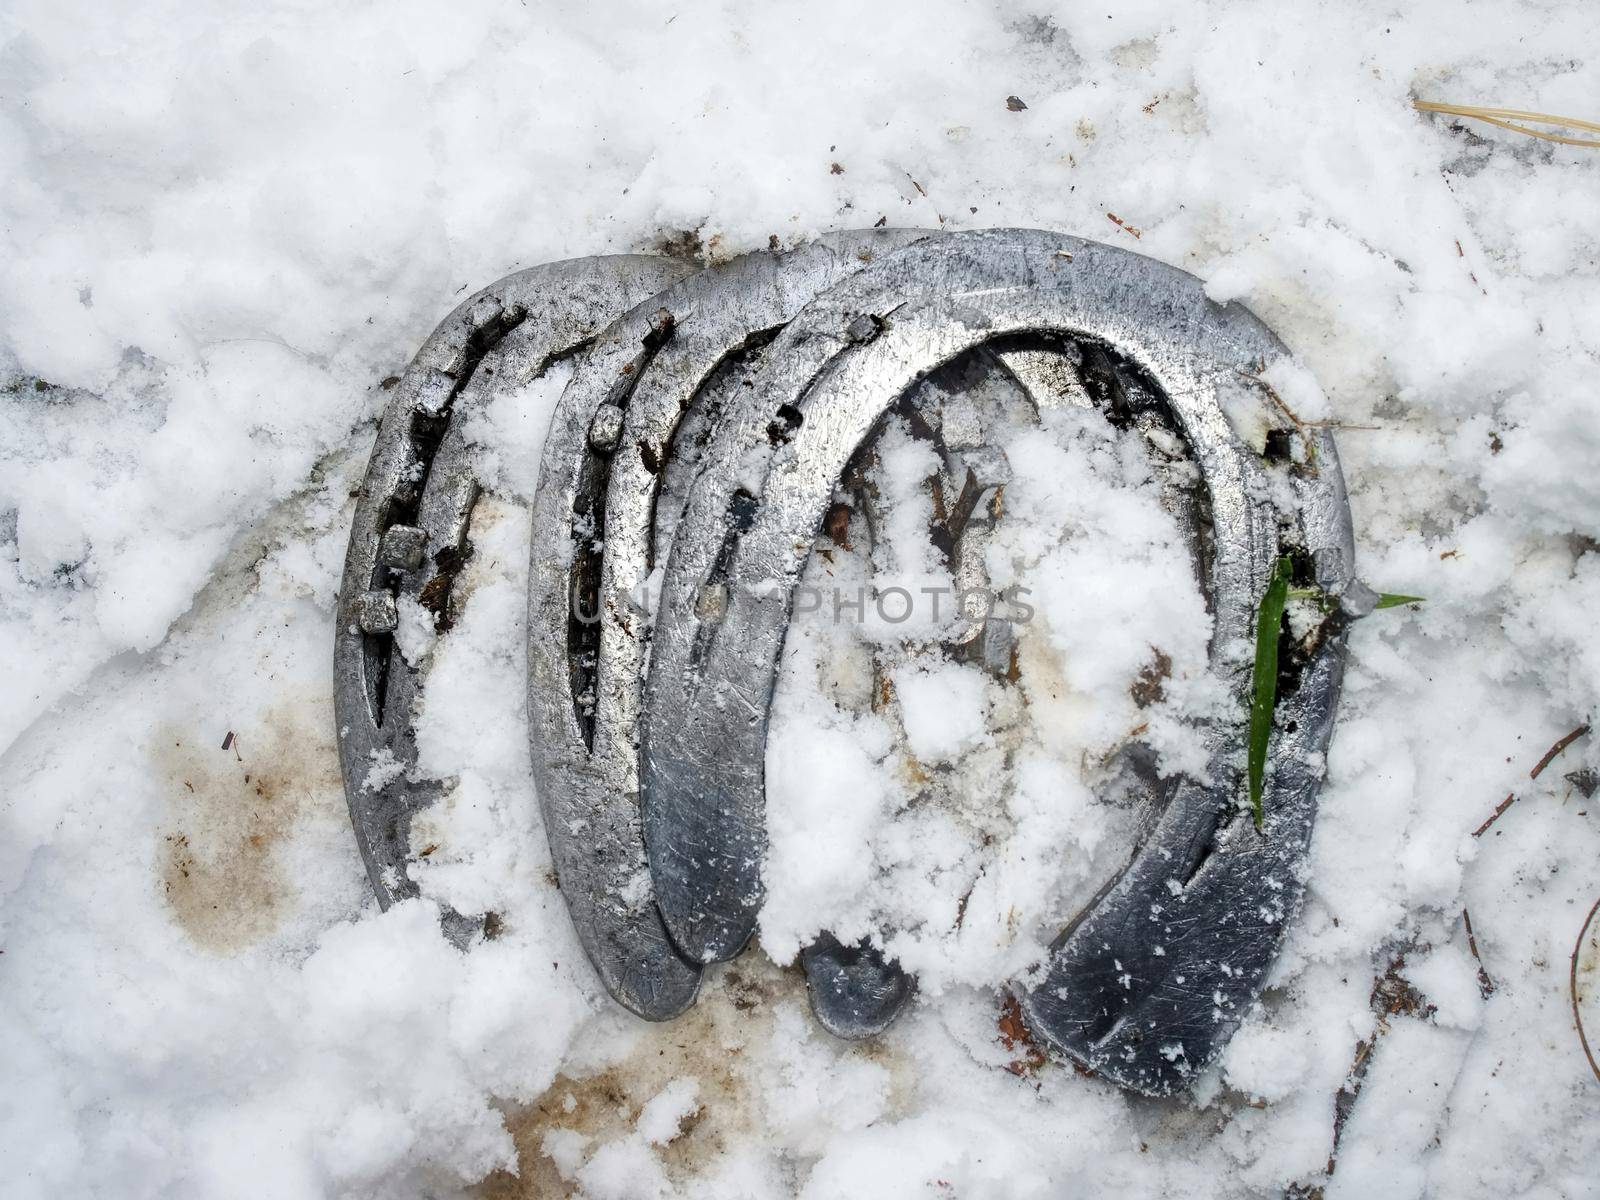 Removing of worn out horseshoes within snow in background by rdonar2